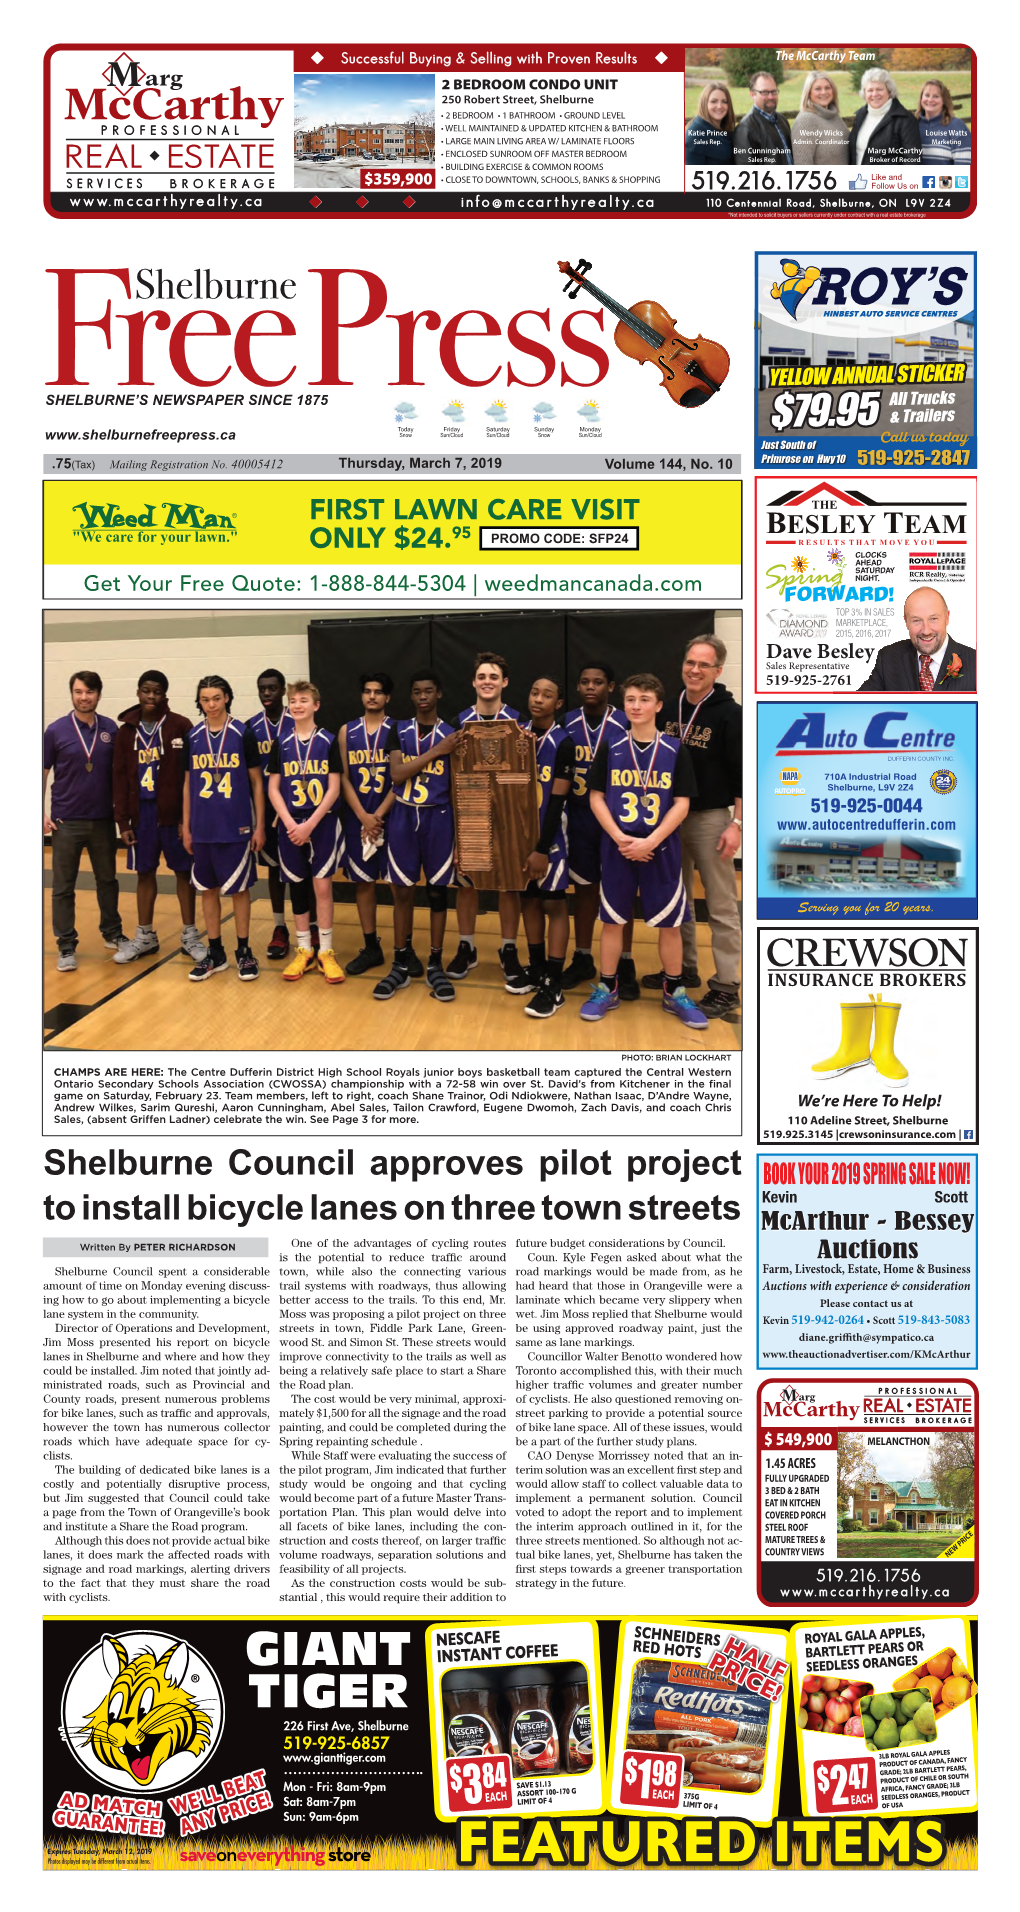 FEATURED ITEMS OVER HALF OFF! Page 2 the SHELBURNE FREE PRESS, Thursday, March 7, 2019 ‘Mardi Gras’ Feast Held at Trinity United Church on Shrove Tuesday